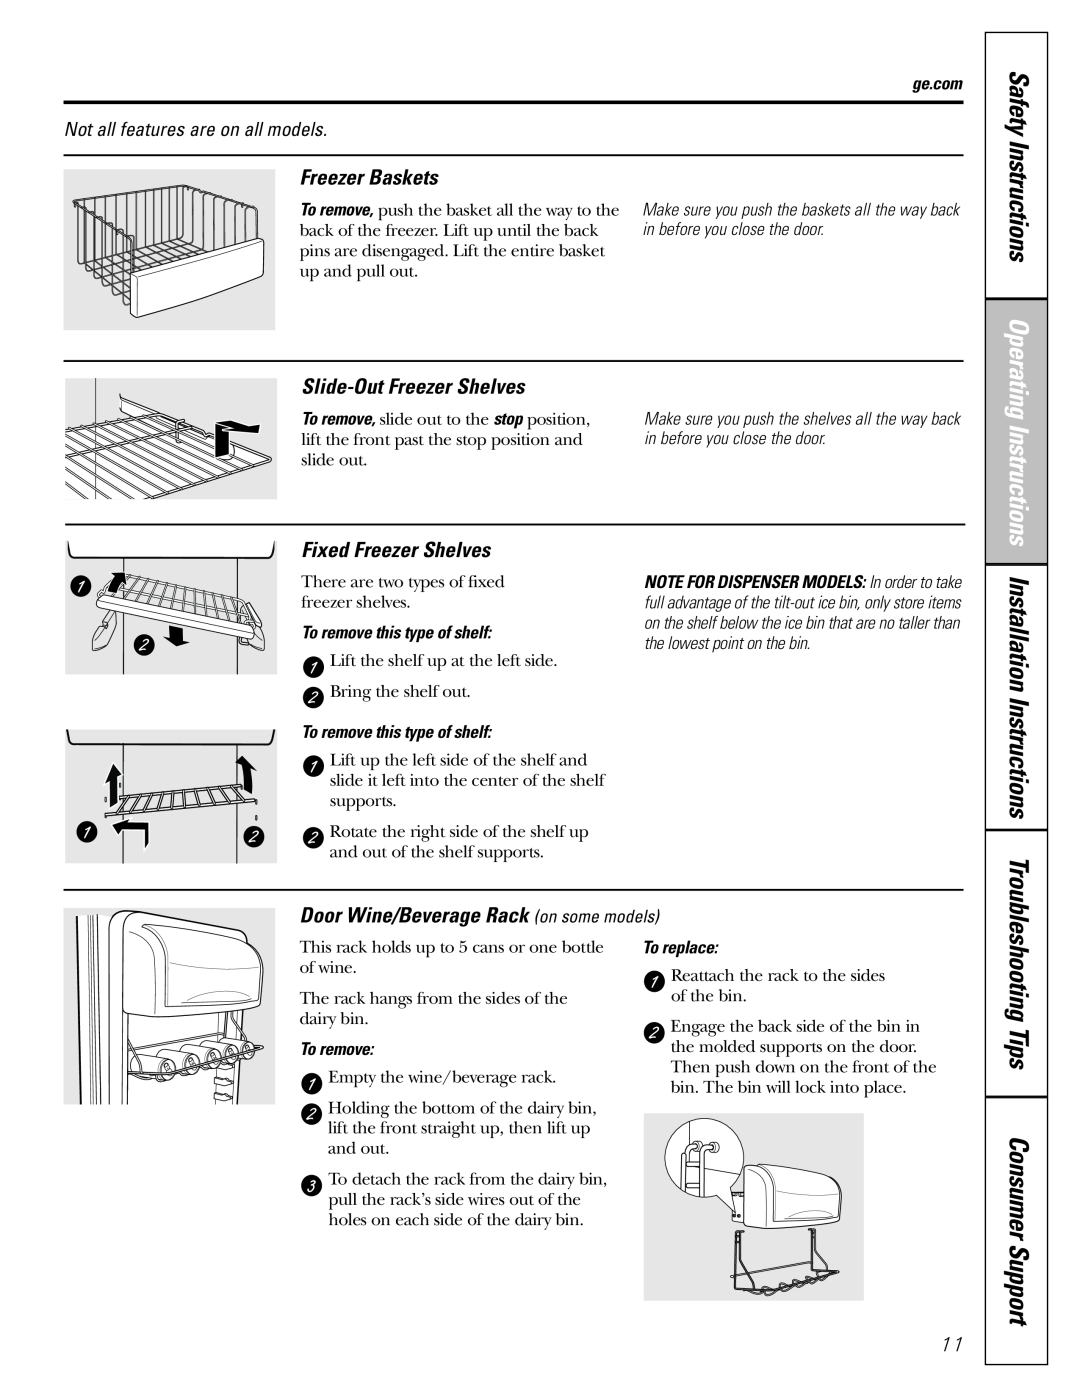 GE 200D8074P017 Installation Instructions, Safety Instructions Operating Instructions, Freezer Baskets, ge.com, To remove 